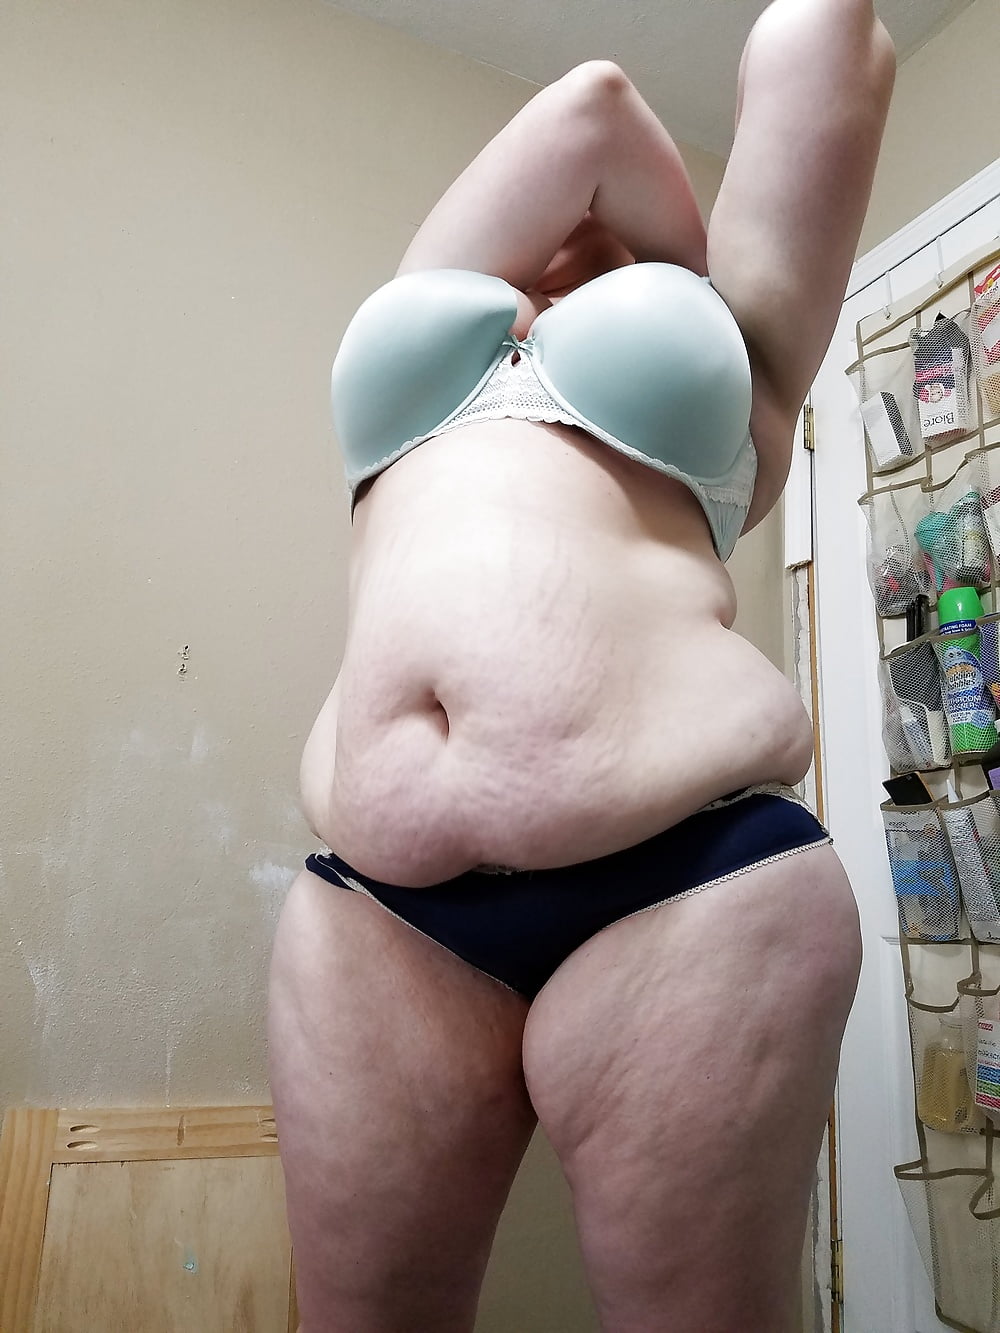 Bbw 44dd Tits - See and Save As bbw wife huge tits porn pict - 4crot.com